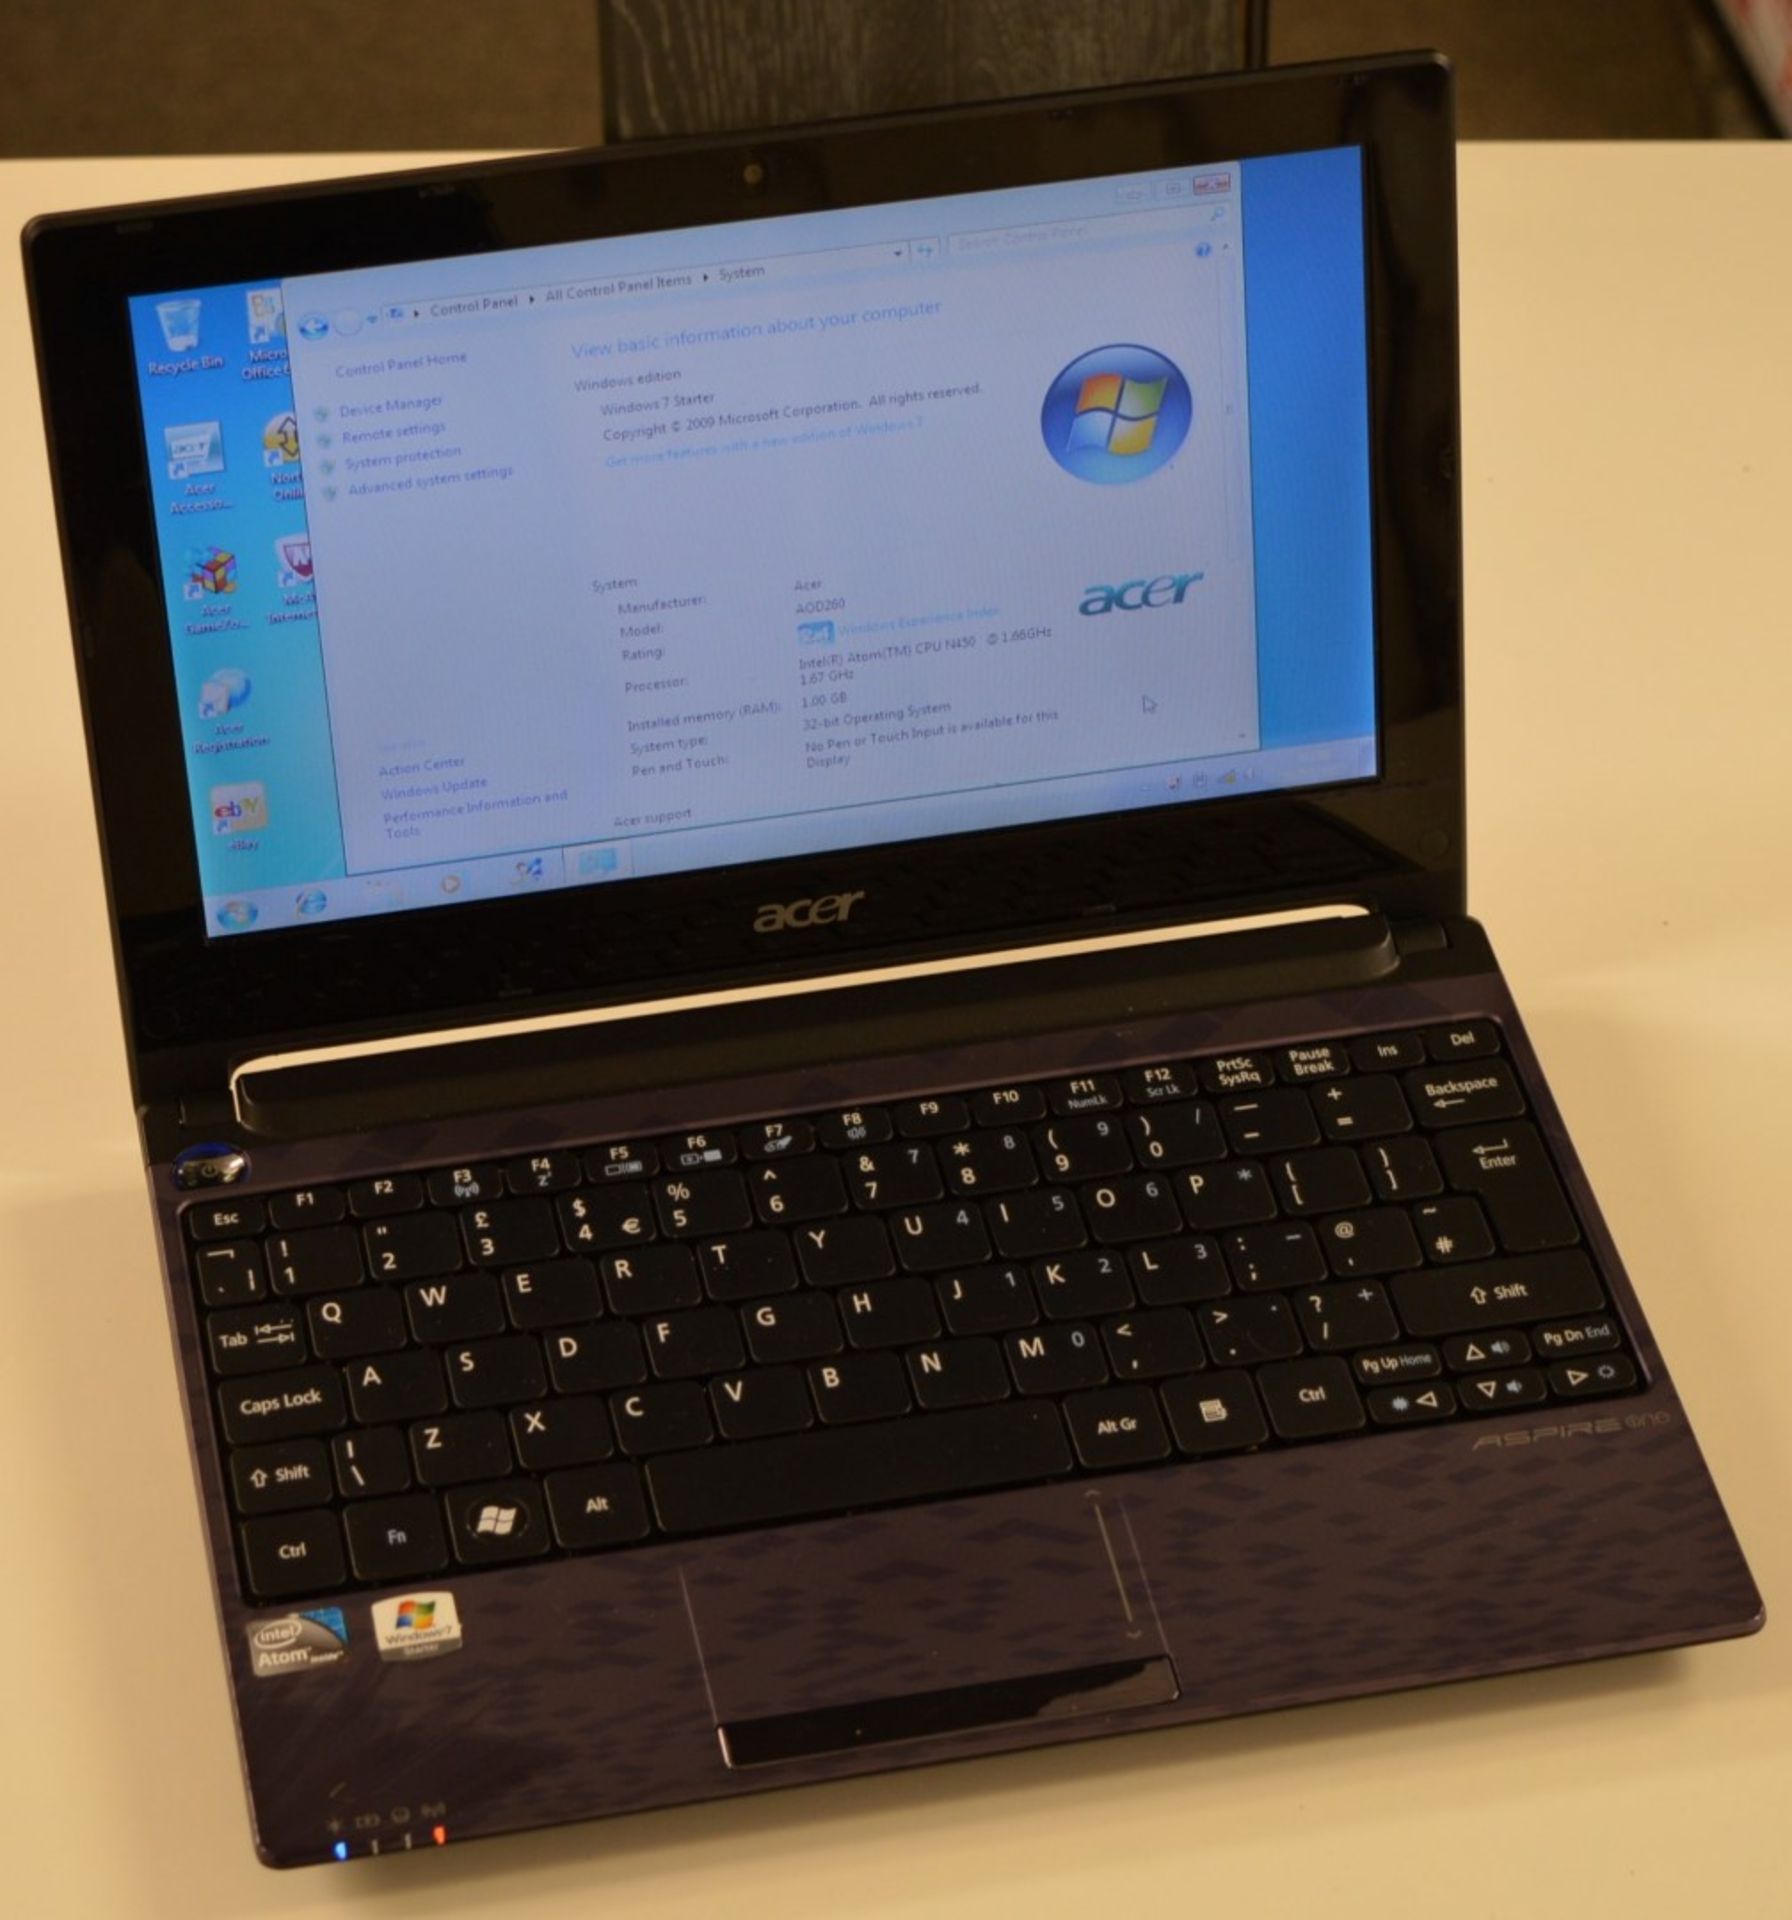 1 x Acer Aspire One Netbook Computer - Features 10 Inch Screen, 250gb Hard Drive, 1gb Ram, Intel 1.